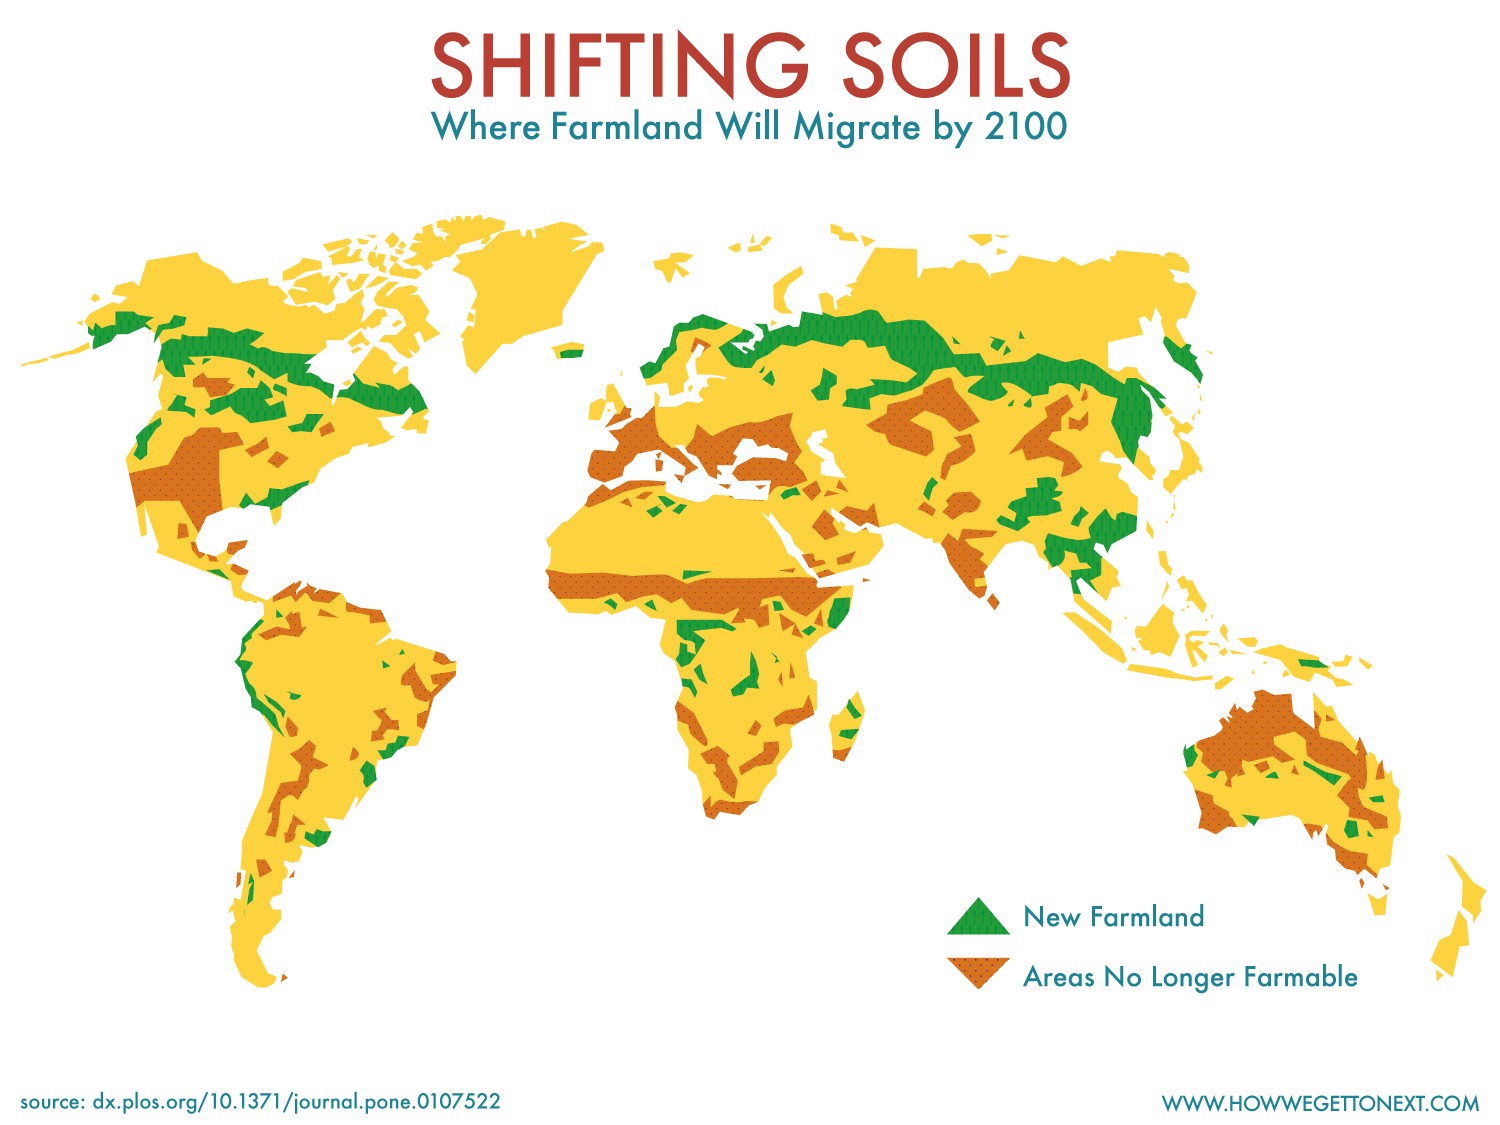 A map of the world showing where farmland will die because of rising global temperatures, and where new farmland will become viable. The new farmland is concentrated in Siberia, Canada, and Southeast Asia, with scattered patches elsewhere. The equatorial and Mediterranean regions, as well as the United States, Central Asia, India, and Australia lose farmland. There is much more lost farmland than land gained.